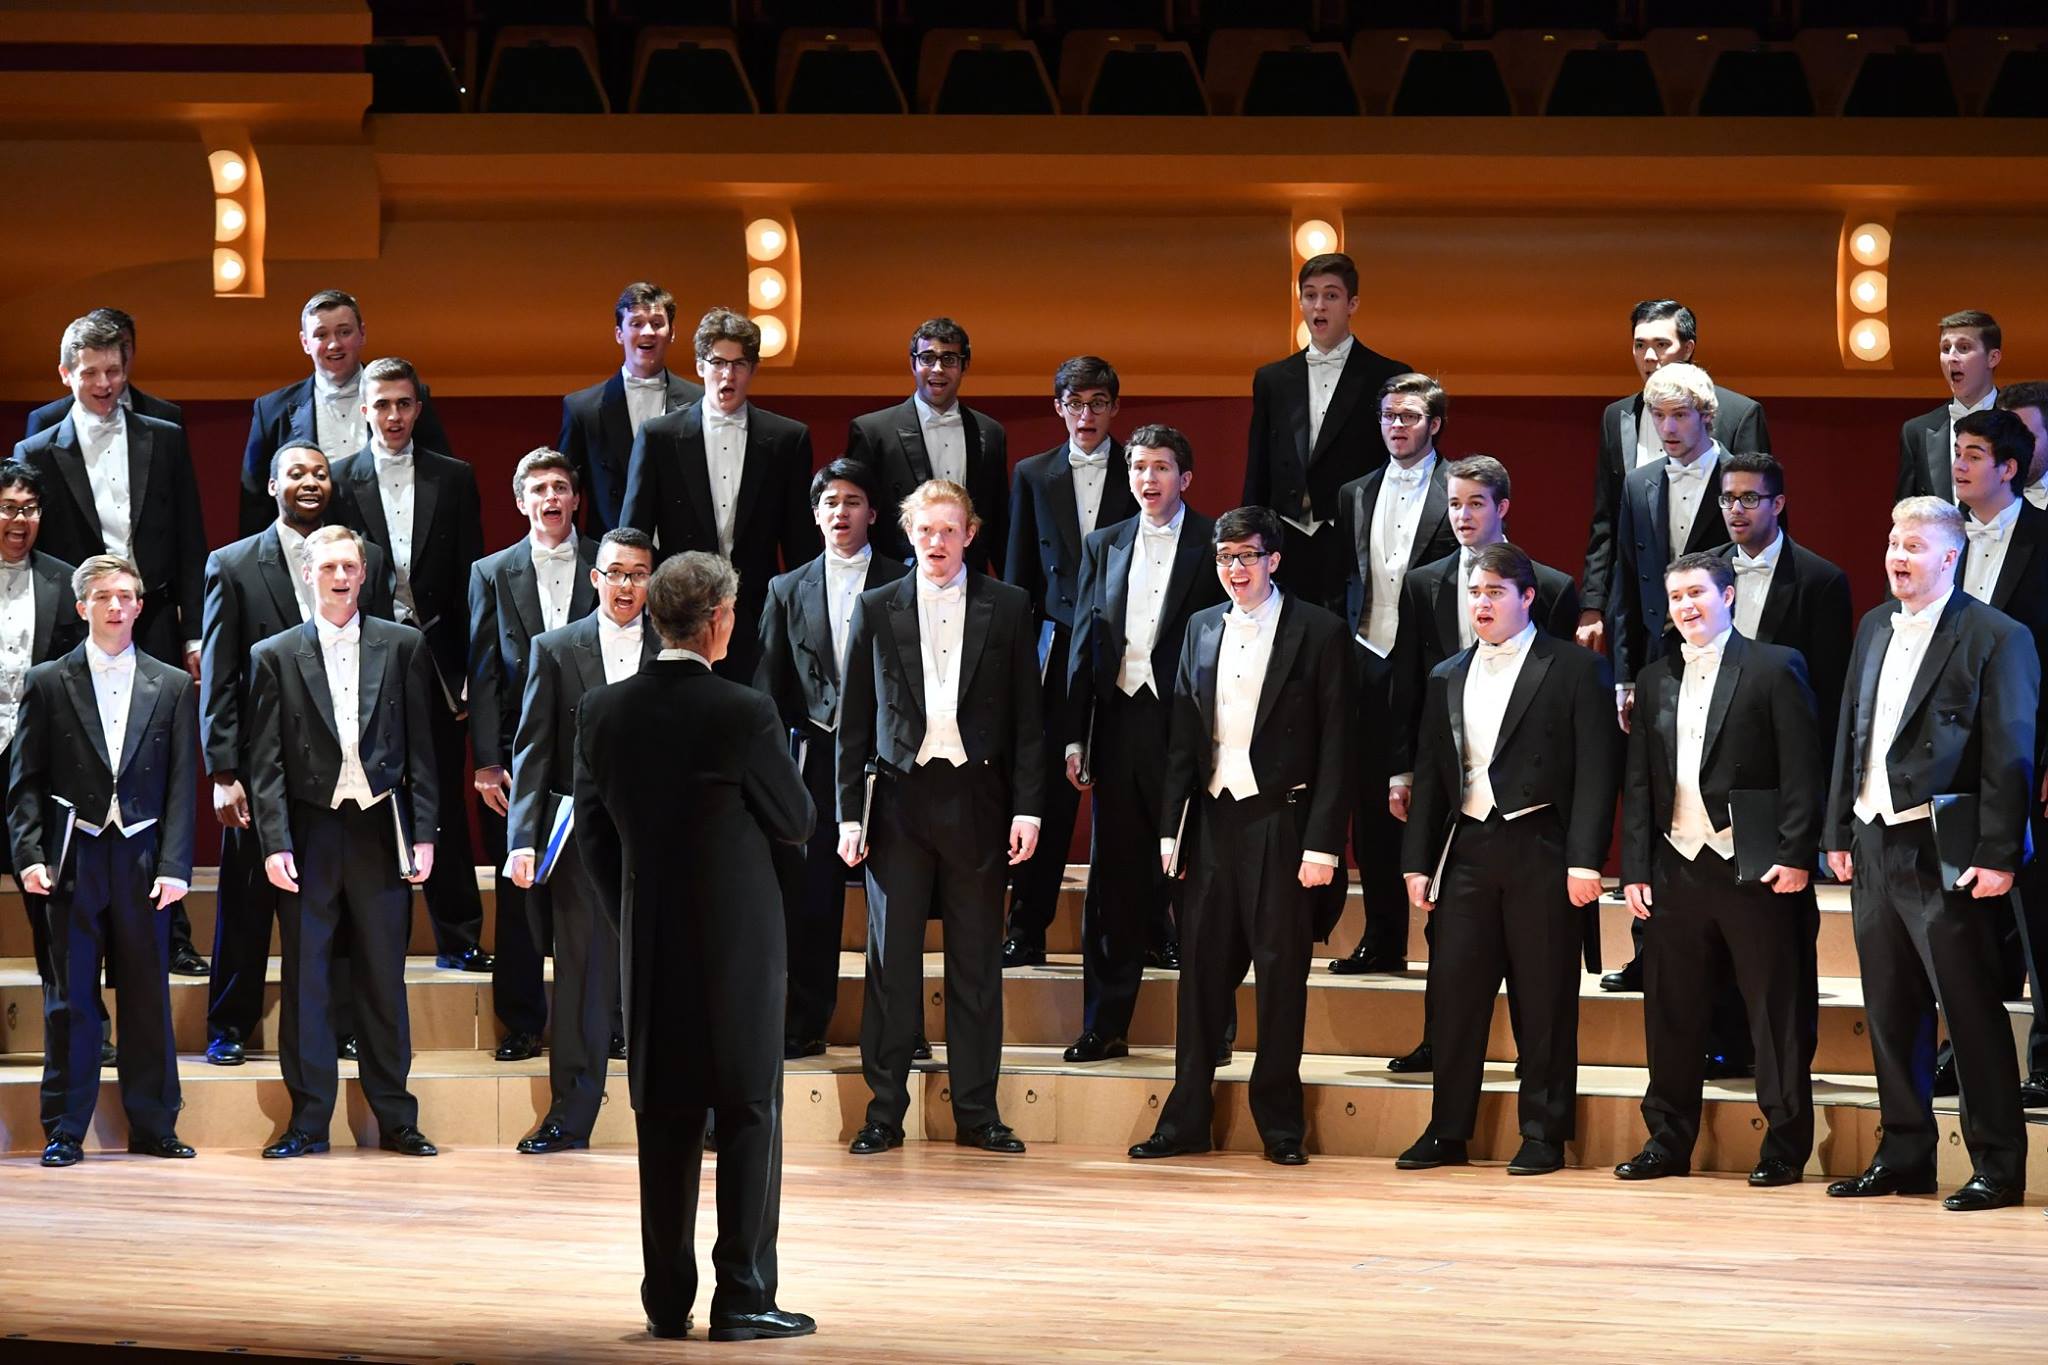 notre dame glee club victory march download